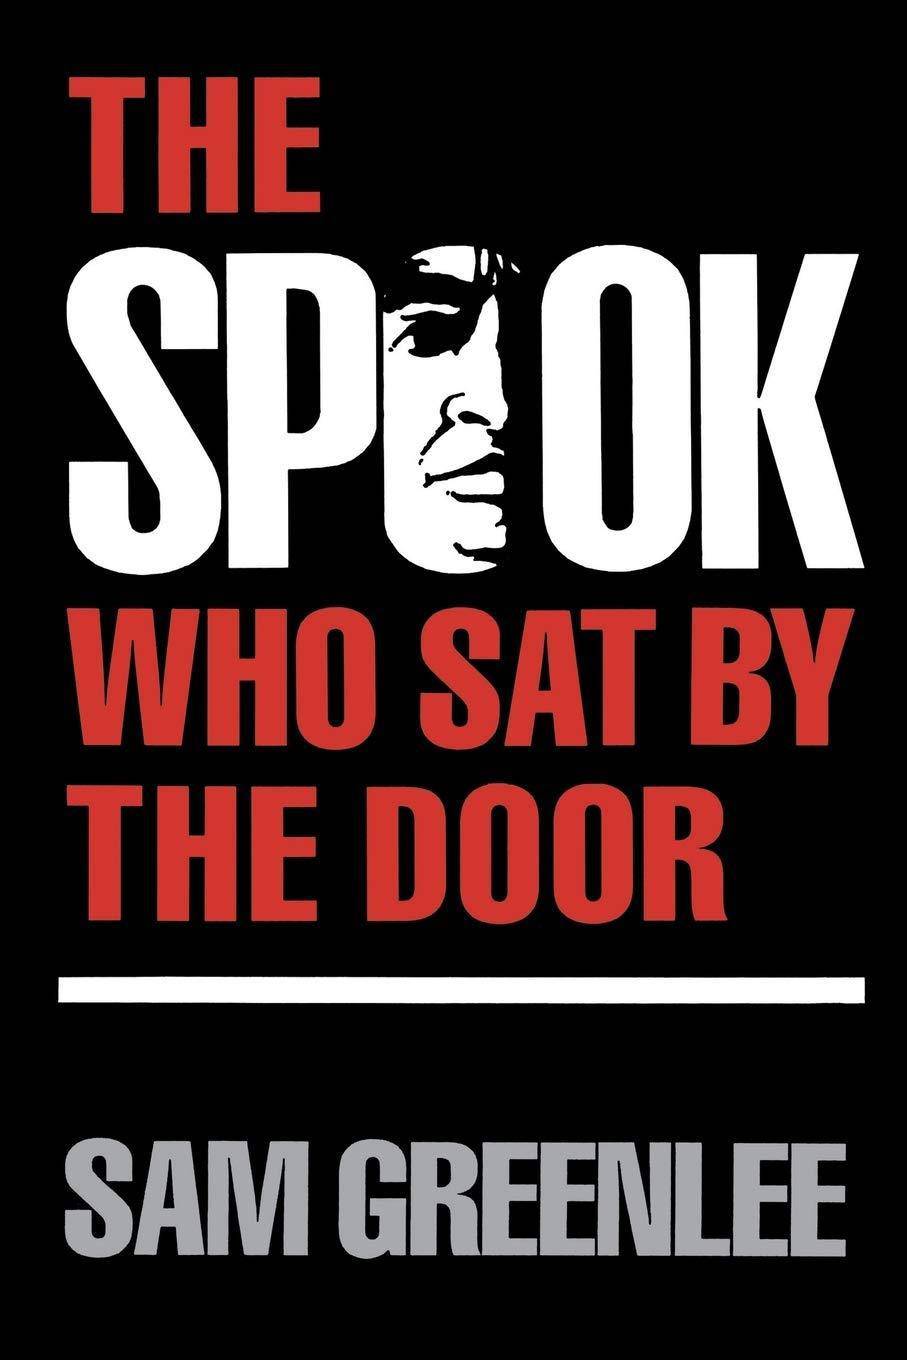 The Spook Who Sat By The Door - SureShot Books Publishing LLC